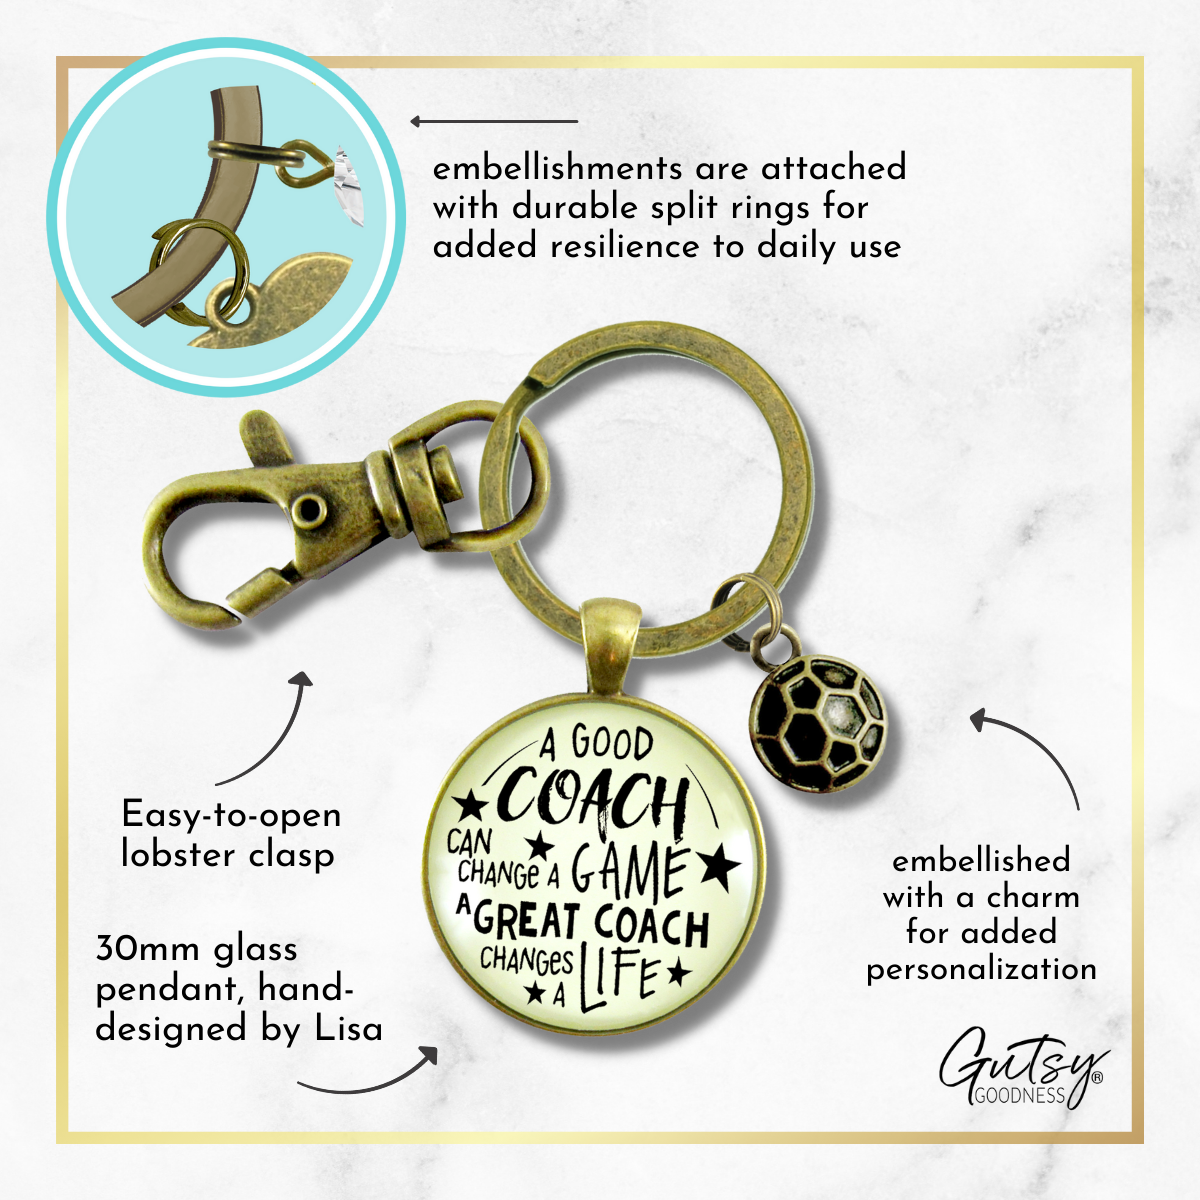 Soccer Coaching Sport Keychain Great Coach Changes Life Thank You Gift - Gutsy Goodness Handmade Jewelry;Soccer Coaching Sport Keychain Great Coach Changes Life Thank You Gift - Gutsy Goodness Handmade Jewelry Gifts